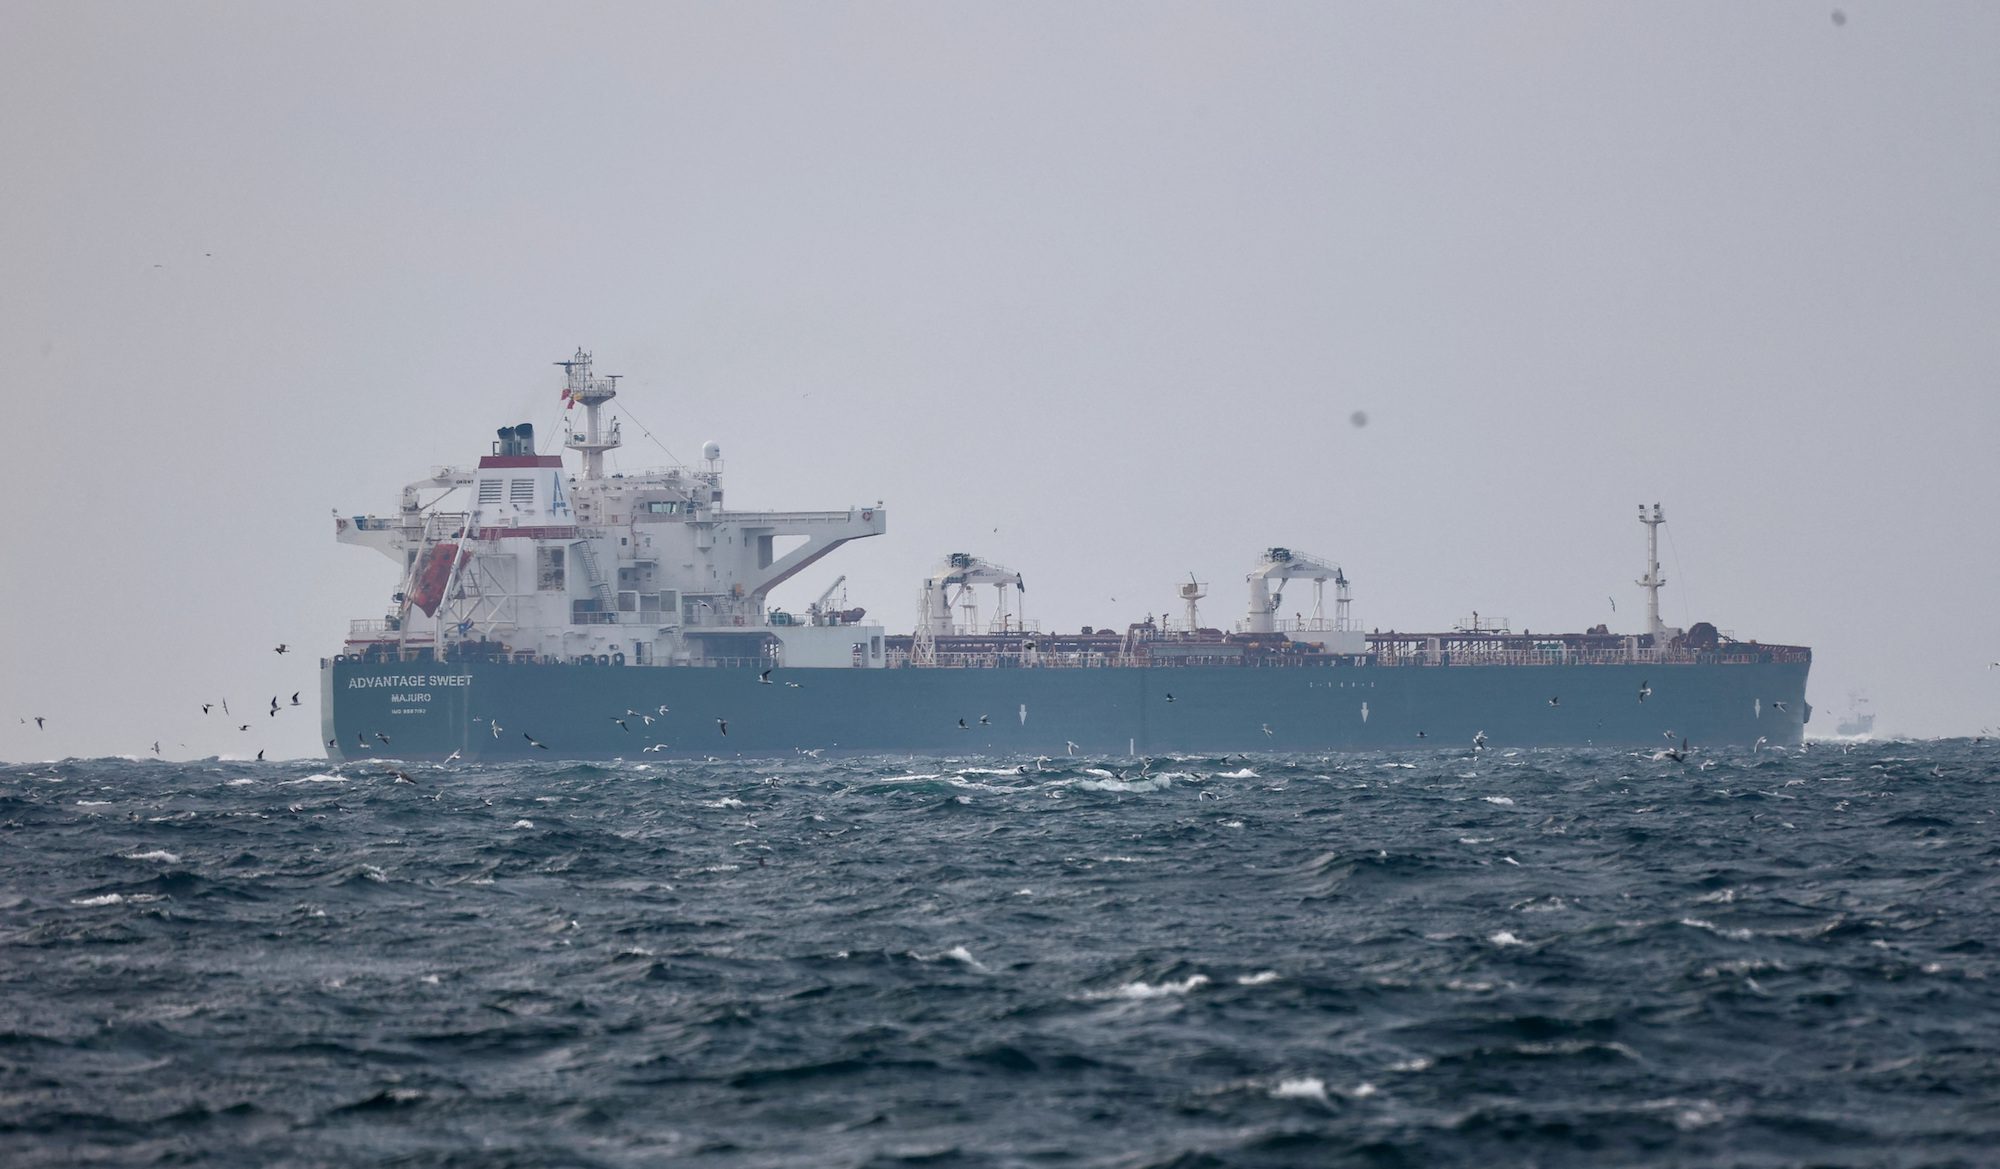 Marshall Islands-flagged oil tanker Advantage Sweet, which, according to Refinitiv ship tracking data, is a Suezmax crude tanker which had been chartered by oil major Chevron and had last docked in Kuwait, sails at Marmara sea near Istanbul, Turkey January 10, 2023. REUTERS/Yoruk Isik